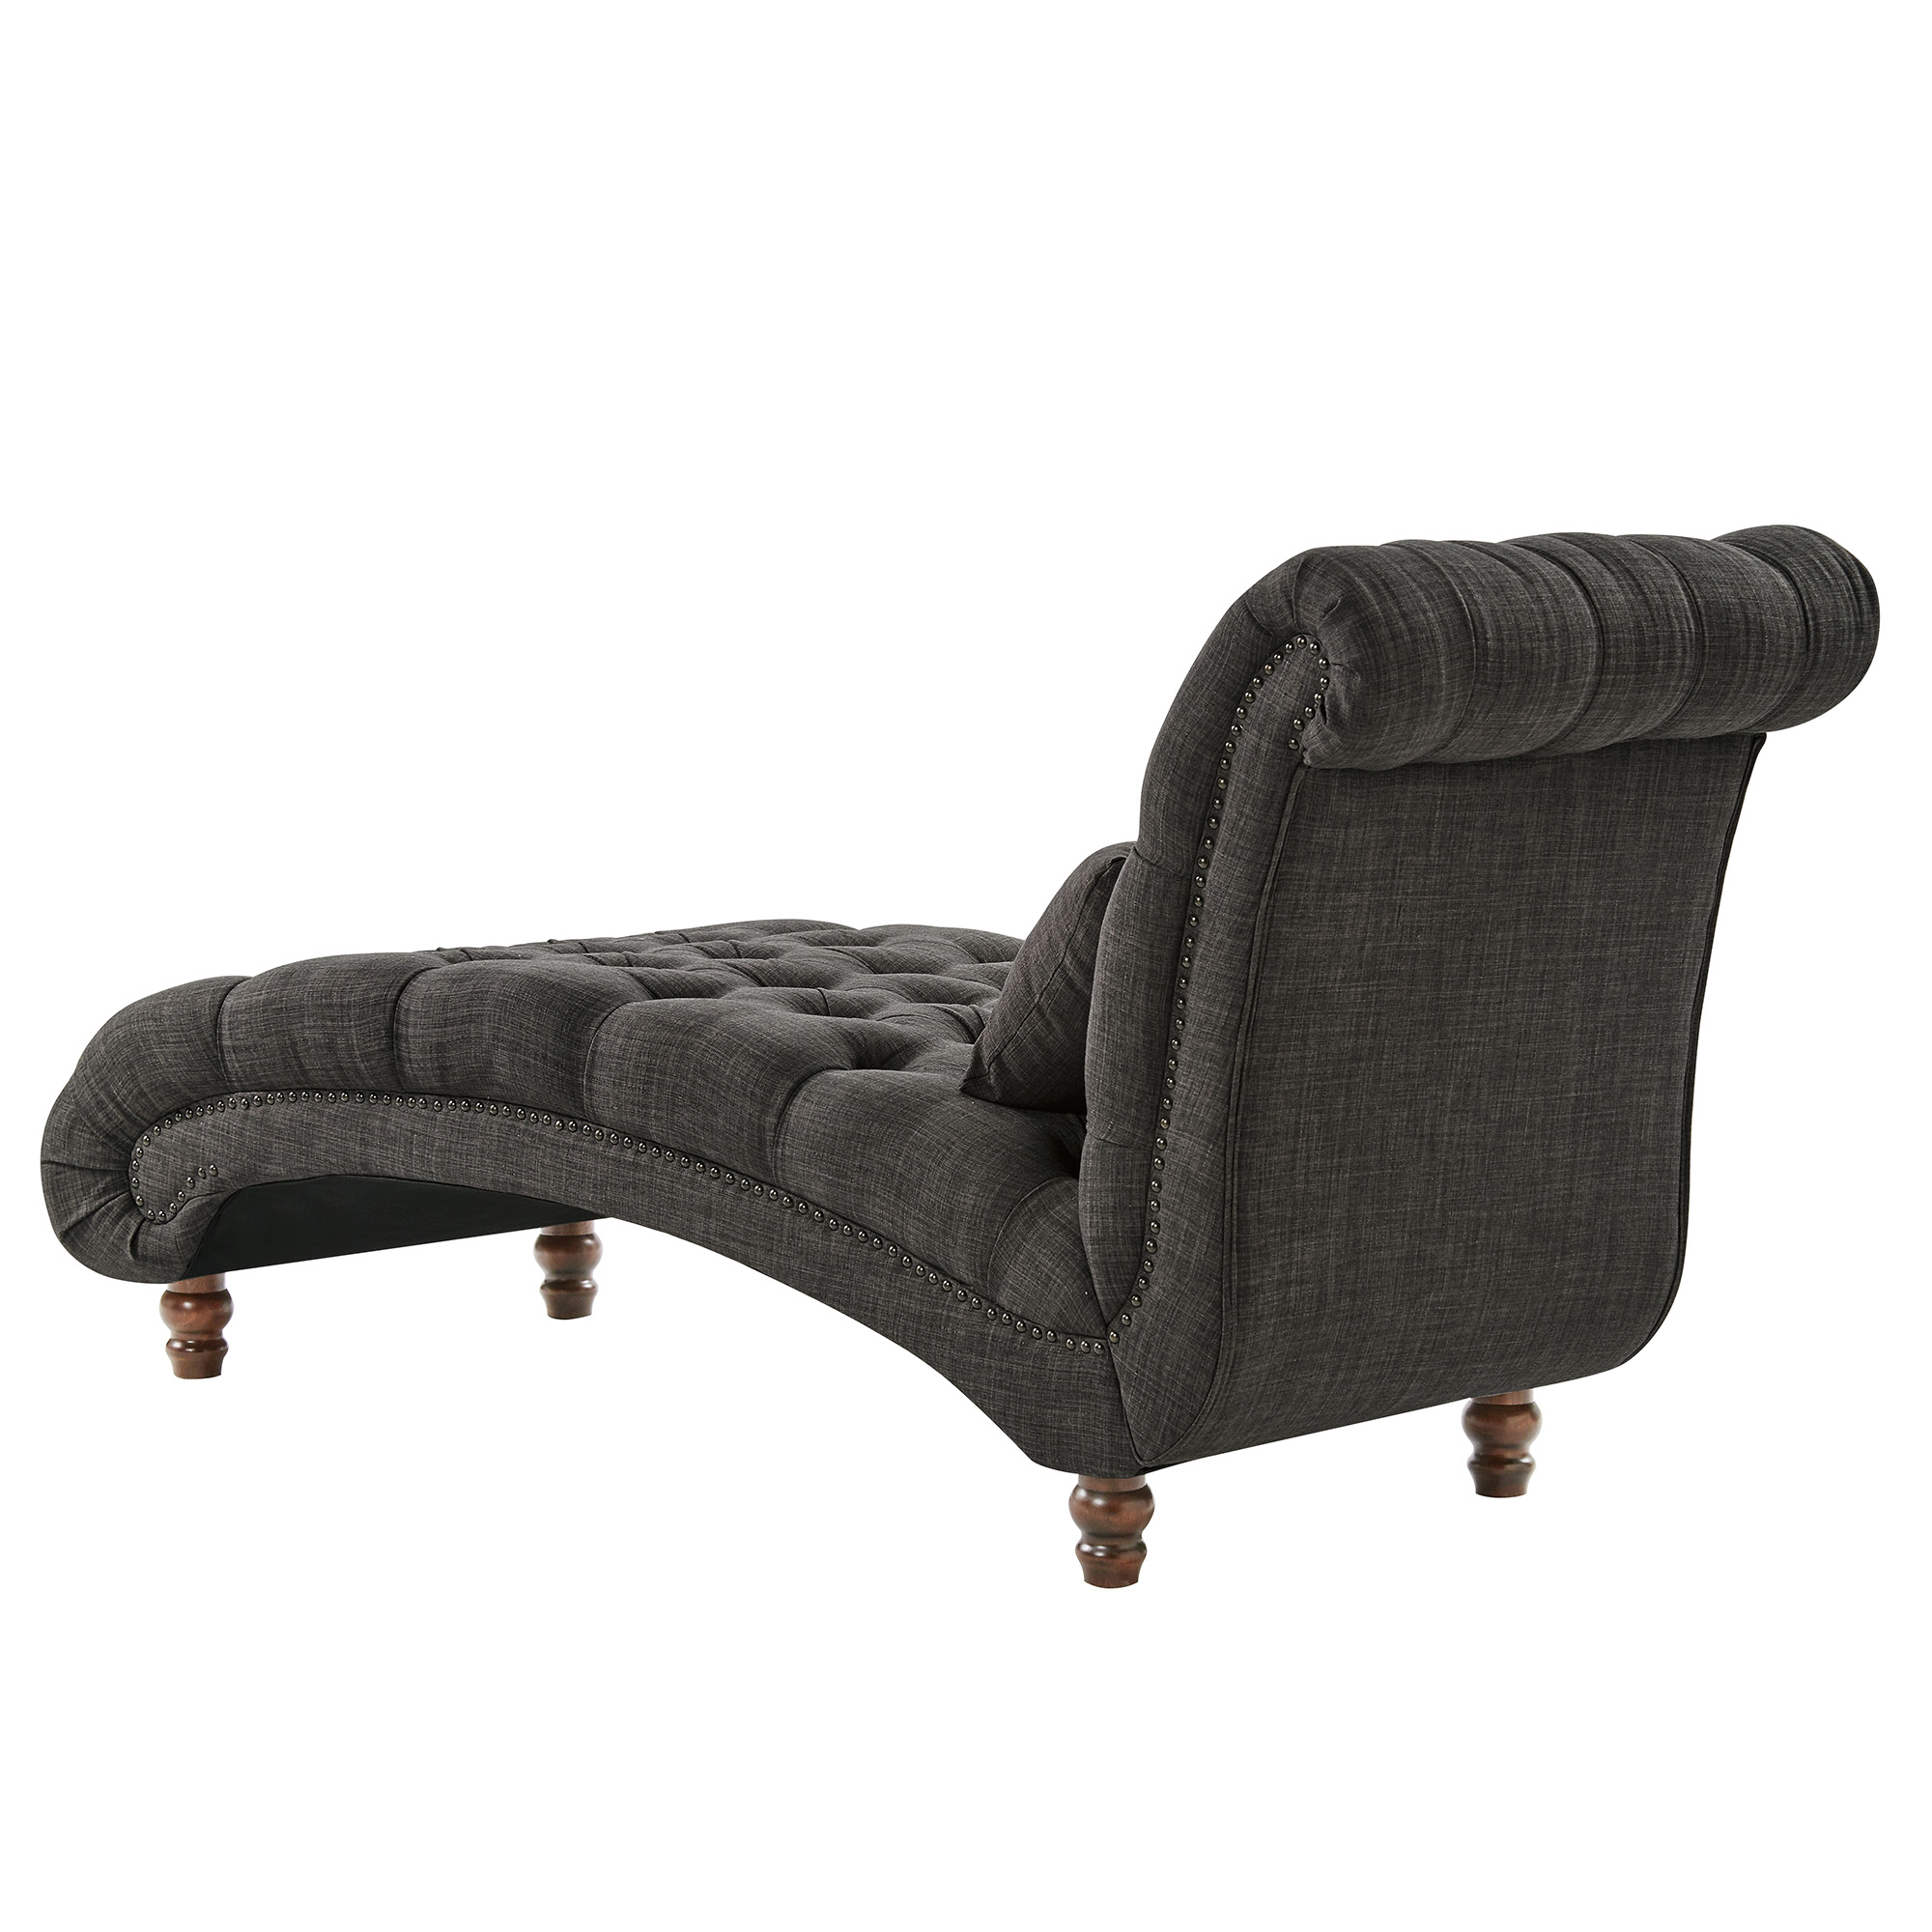 Weston Home Bowman Long Tufted Lounge Chair With Matching Pillow, Dark Gray Linen - image 4 of 6